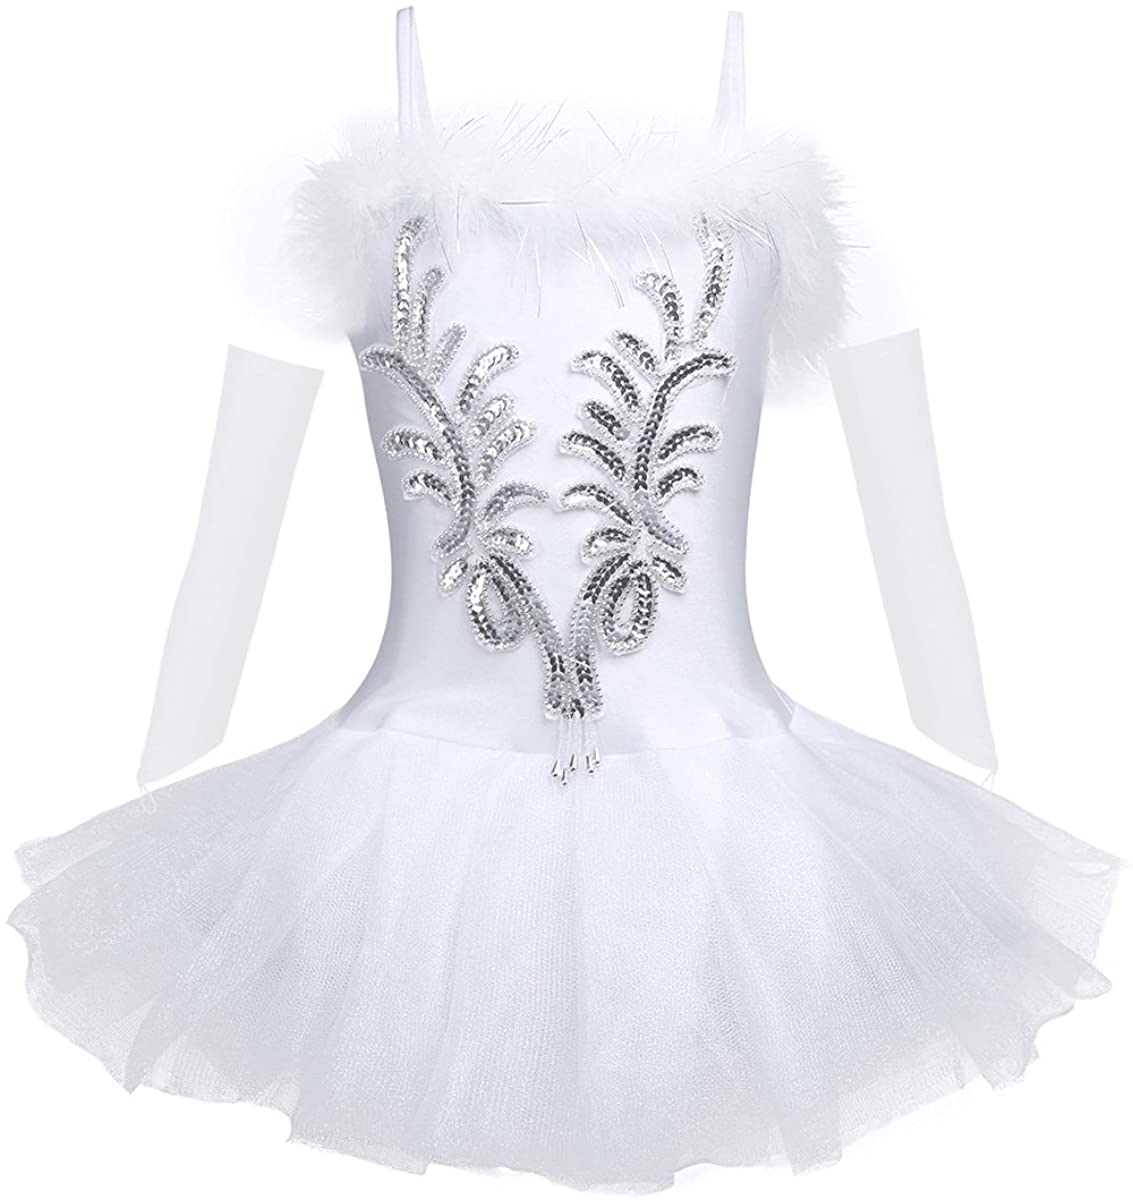 Agoky Girls Ballerina Swan Outfit Sequins Faux Fur Ballet Dance Tutu Dress with Fingerless Gloves and Hair Clip Set